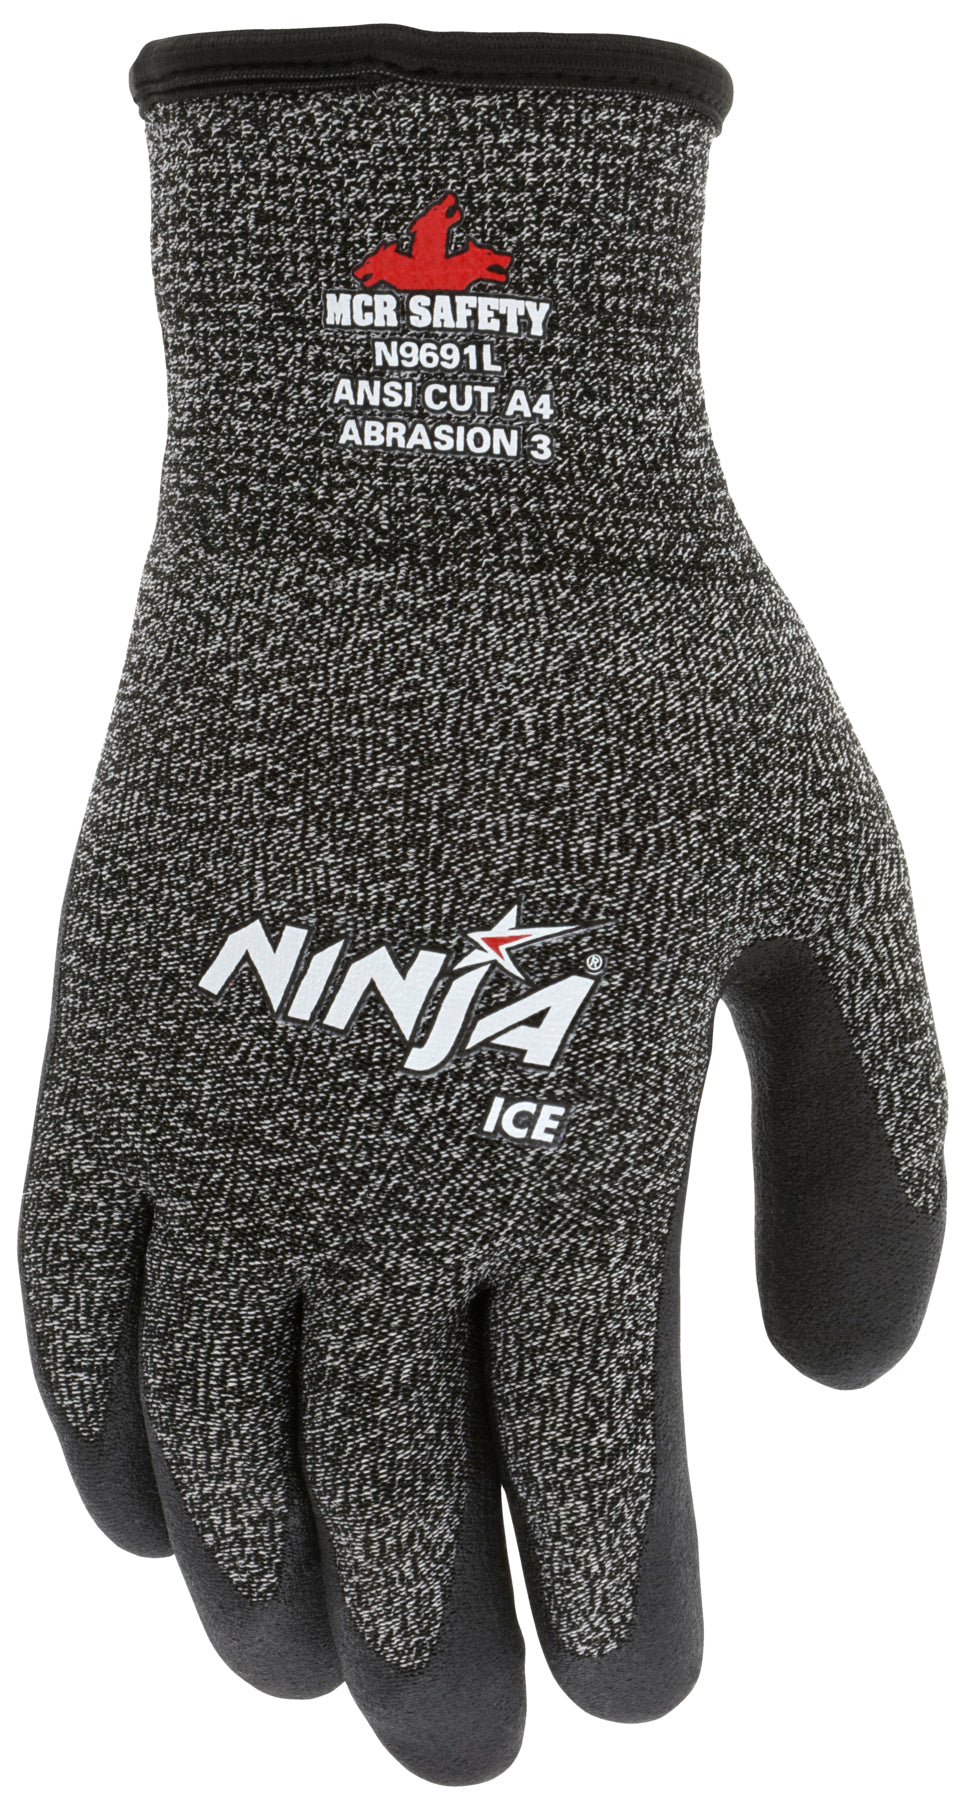 MCR safety N9691 Ninja Ice Insulated Cut Resistant Work Gloves 15